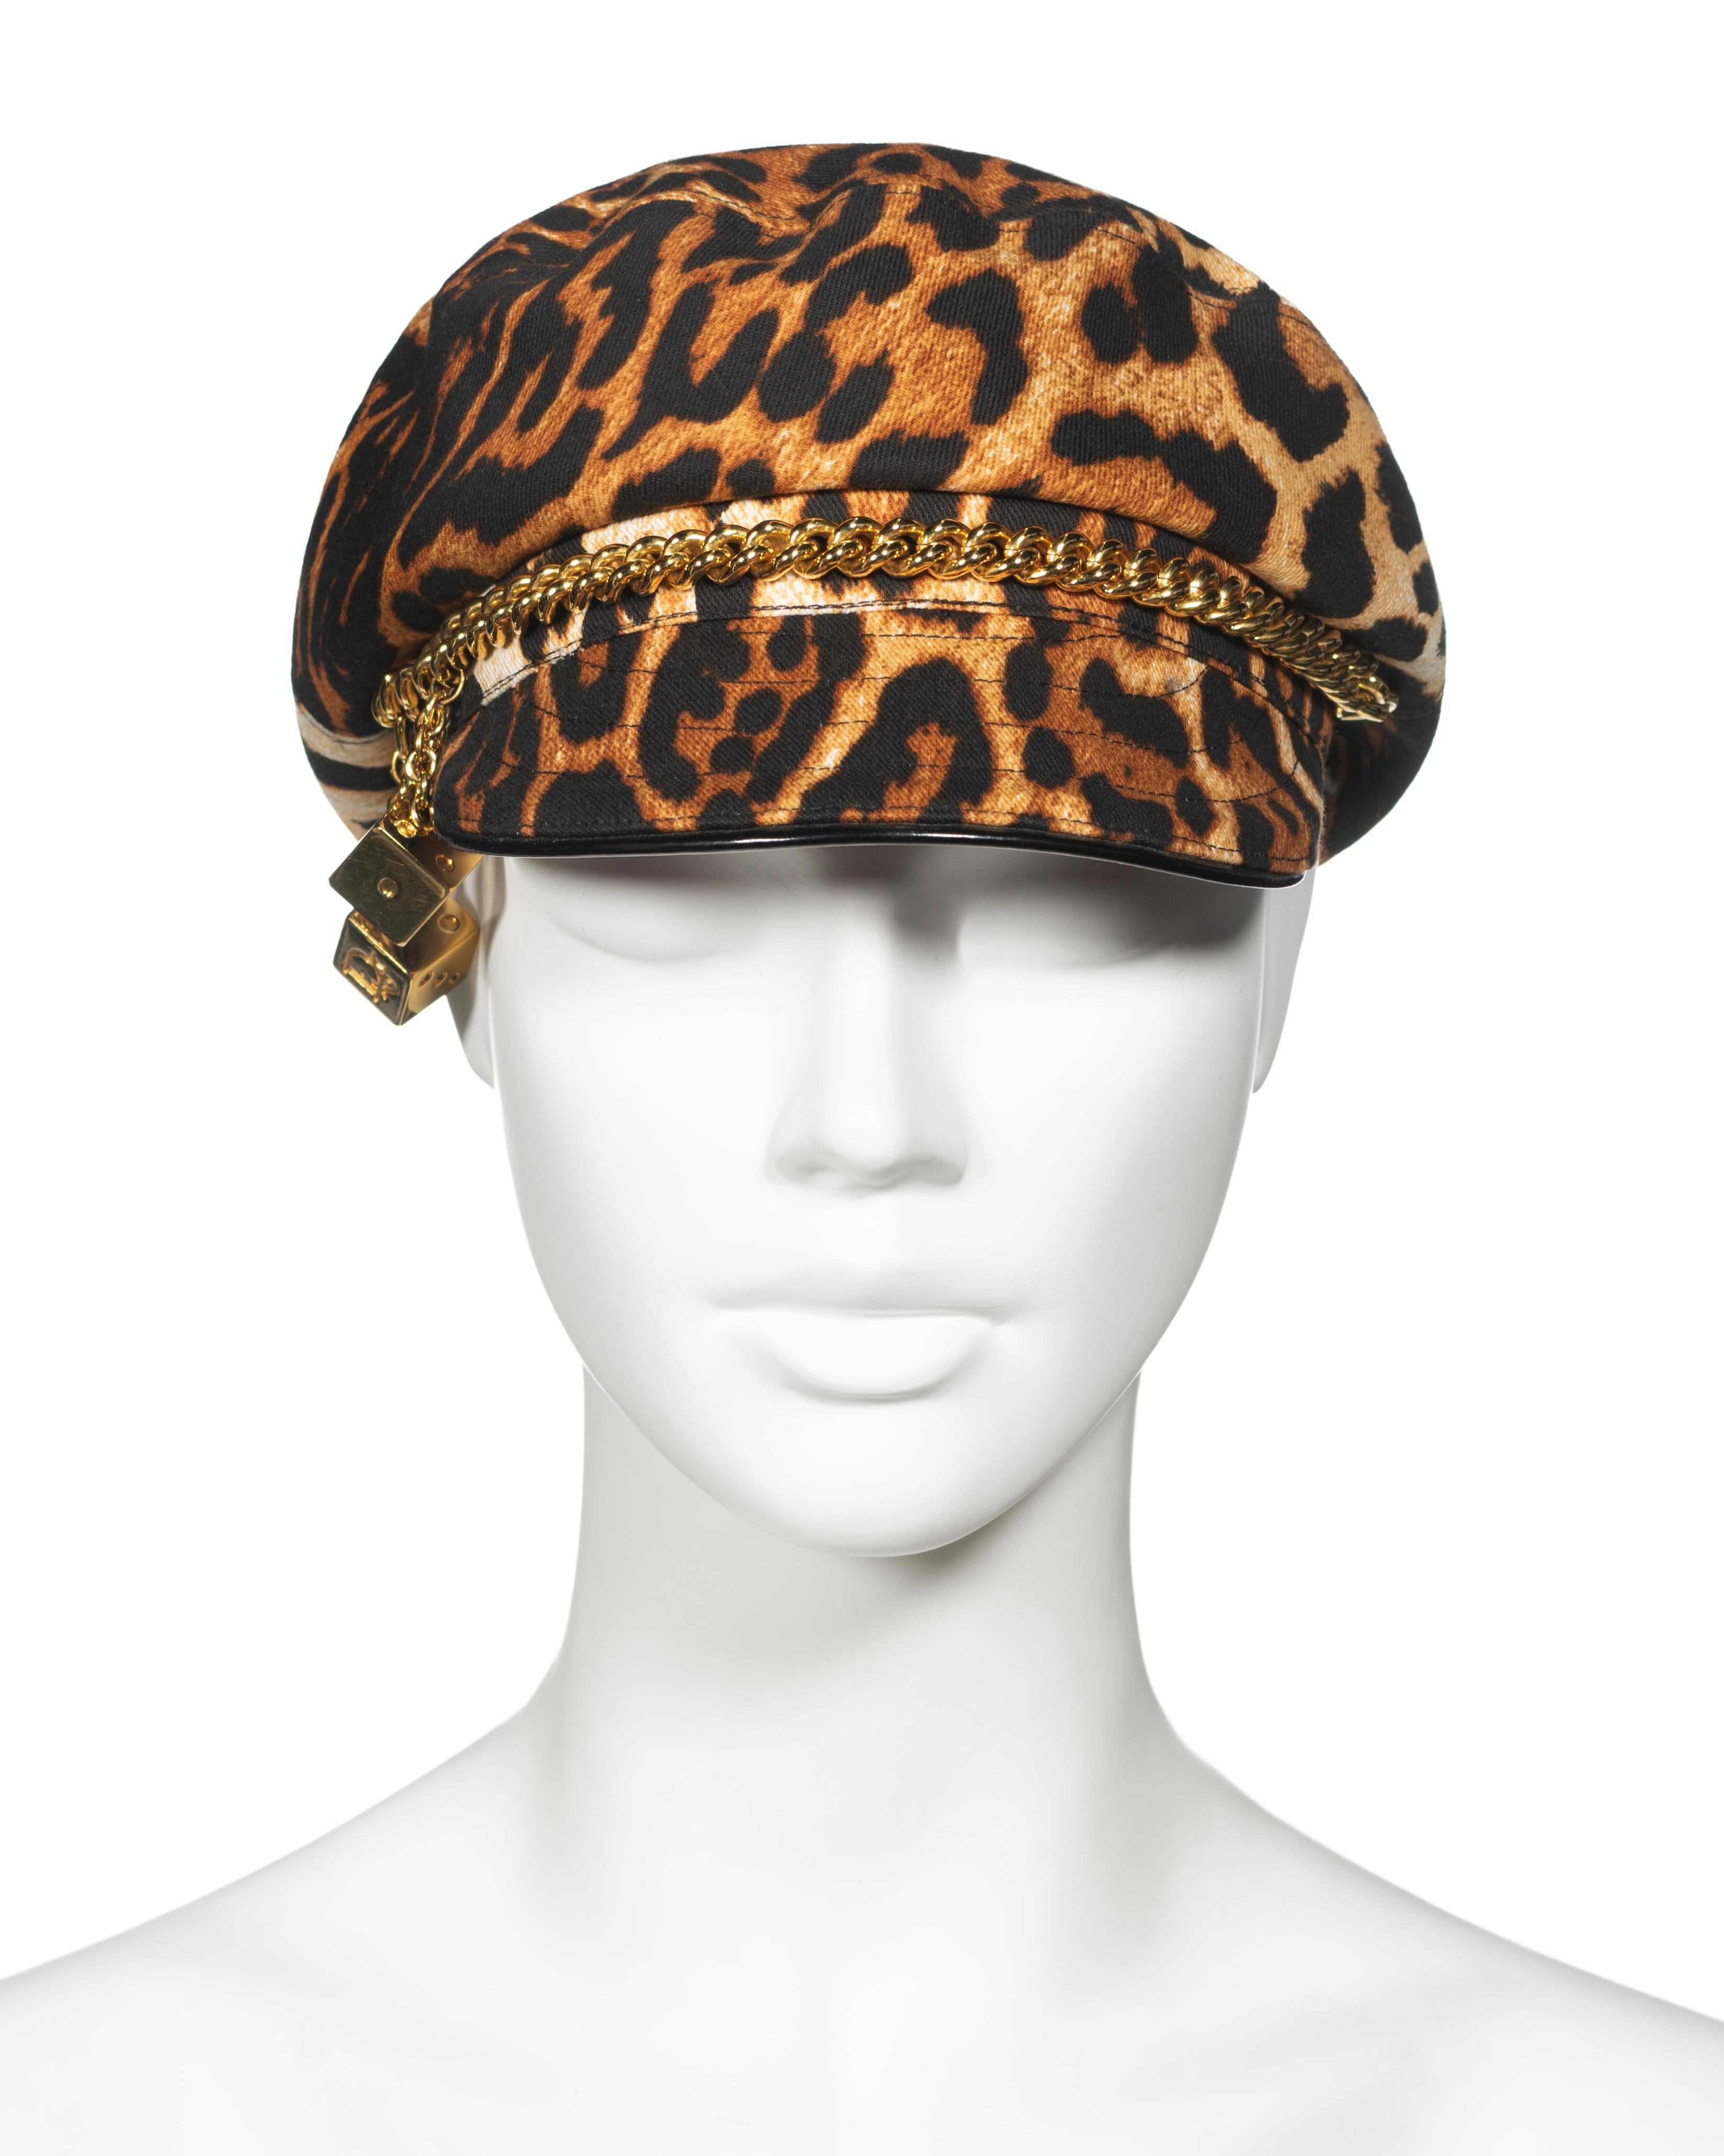 ▪ Christian Dior Bakerboy 'Gambler' Cap 
▪ Creative Director: John Galliano
▪ Fall-Winter 2004
▪ Sold by One of a Kind Archive
▪ Crafted from robust cotton twill adorned with a leopard print
▪ Accented with a decorative gilt metal chain and two